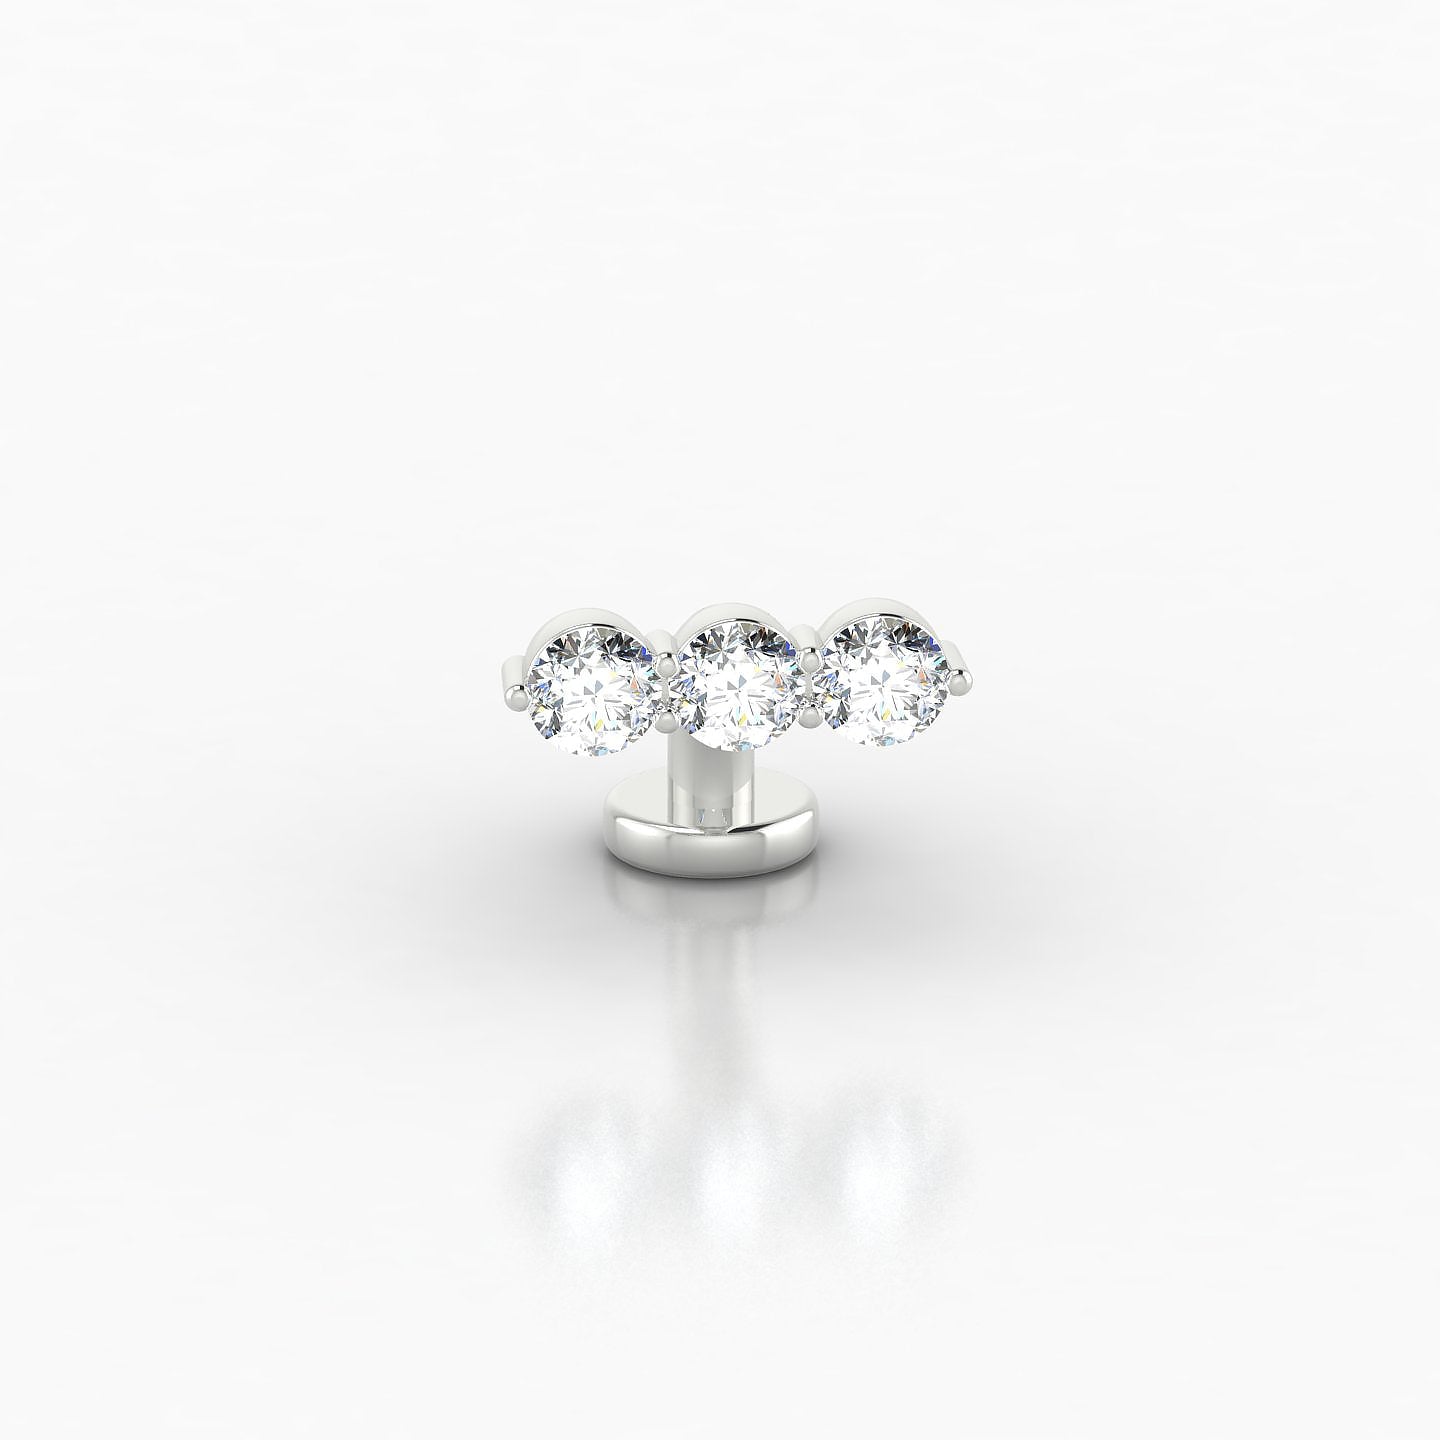 Ma'at | 18k White Gold 6 mm 9 mm Trilogy Diamond Floating Navel Piercing